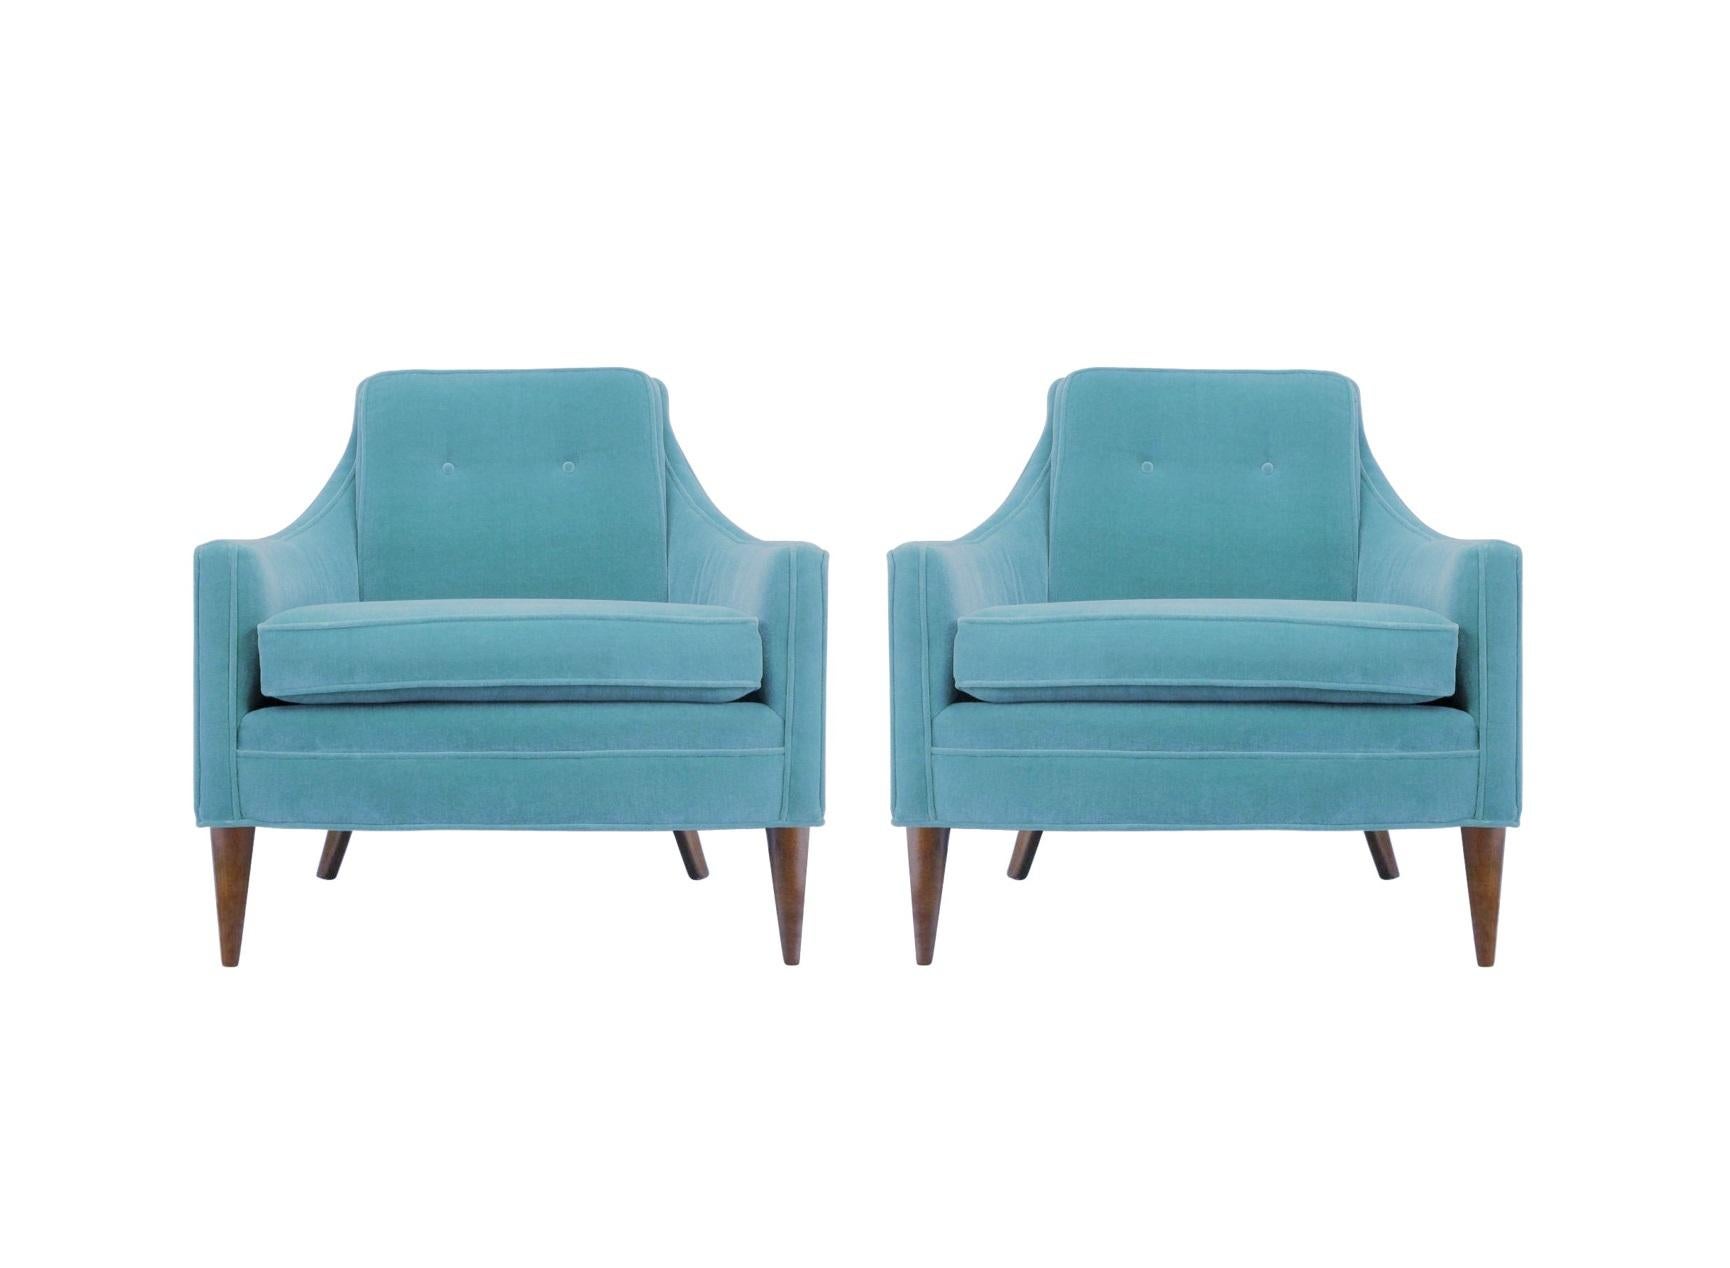 Don’t settle for any lounge chairs. These amazing chairs are the epitome of comfort and style with ahead-of-the-trend transitional design will not let you down. Incorporating classic lines with a streamlined silhouette, the perfect combination of